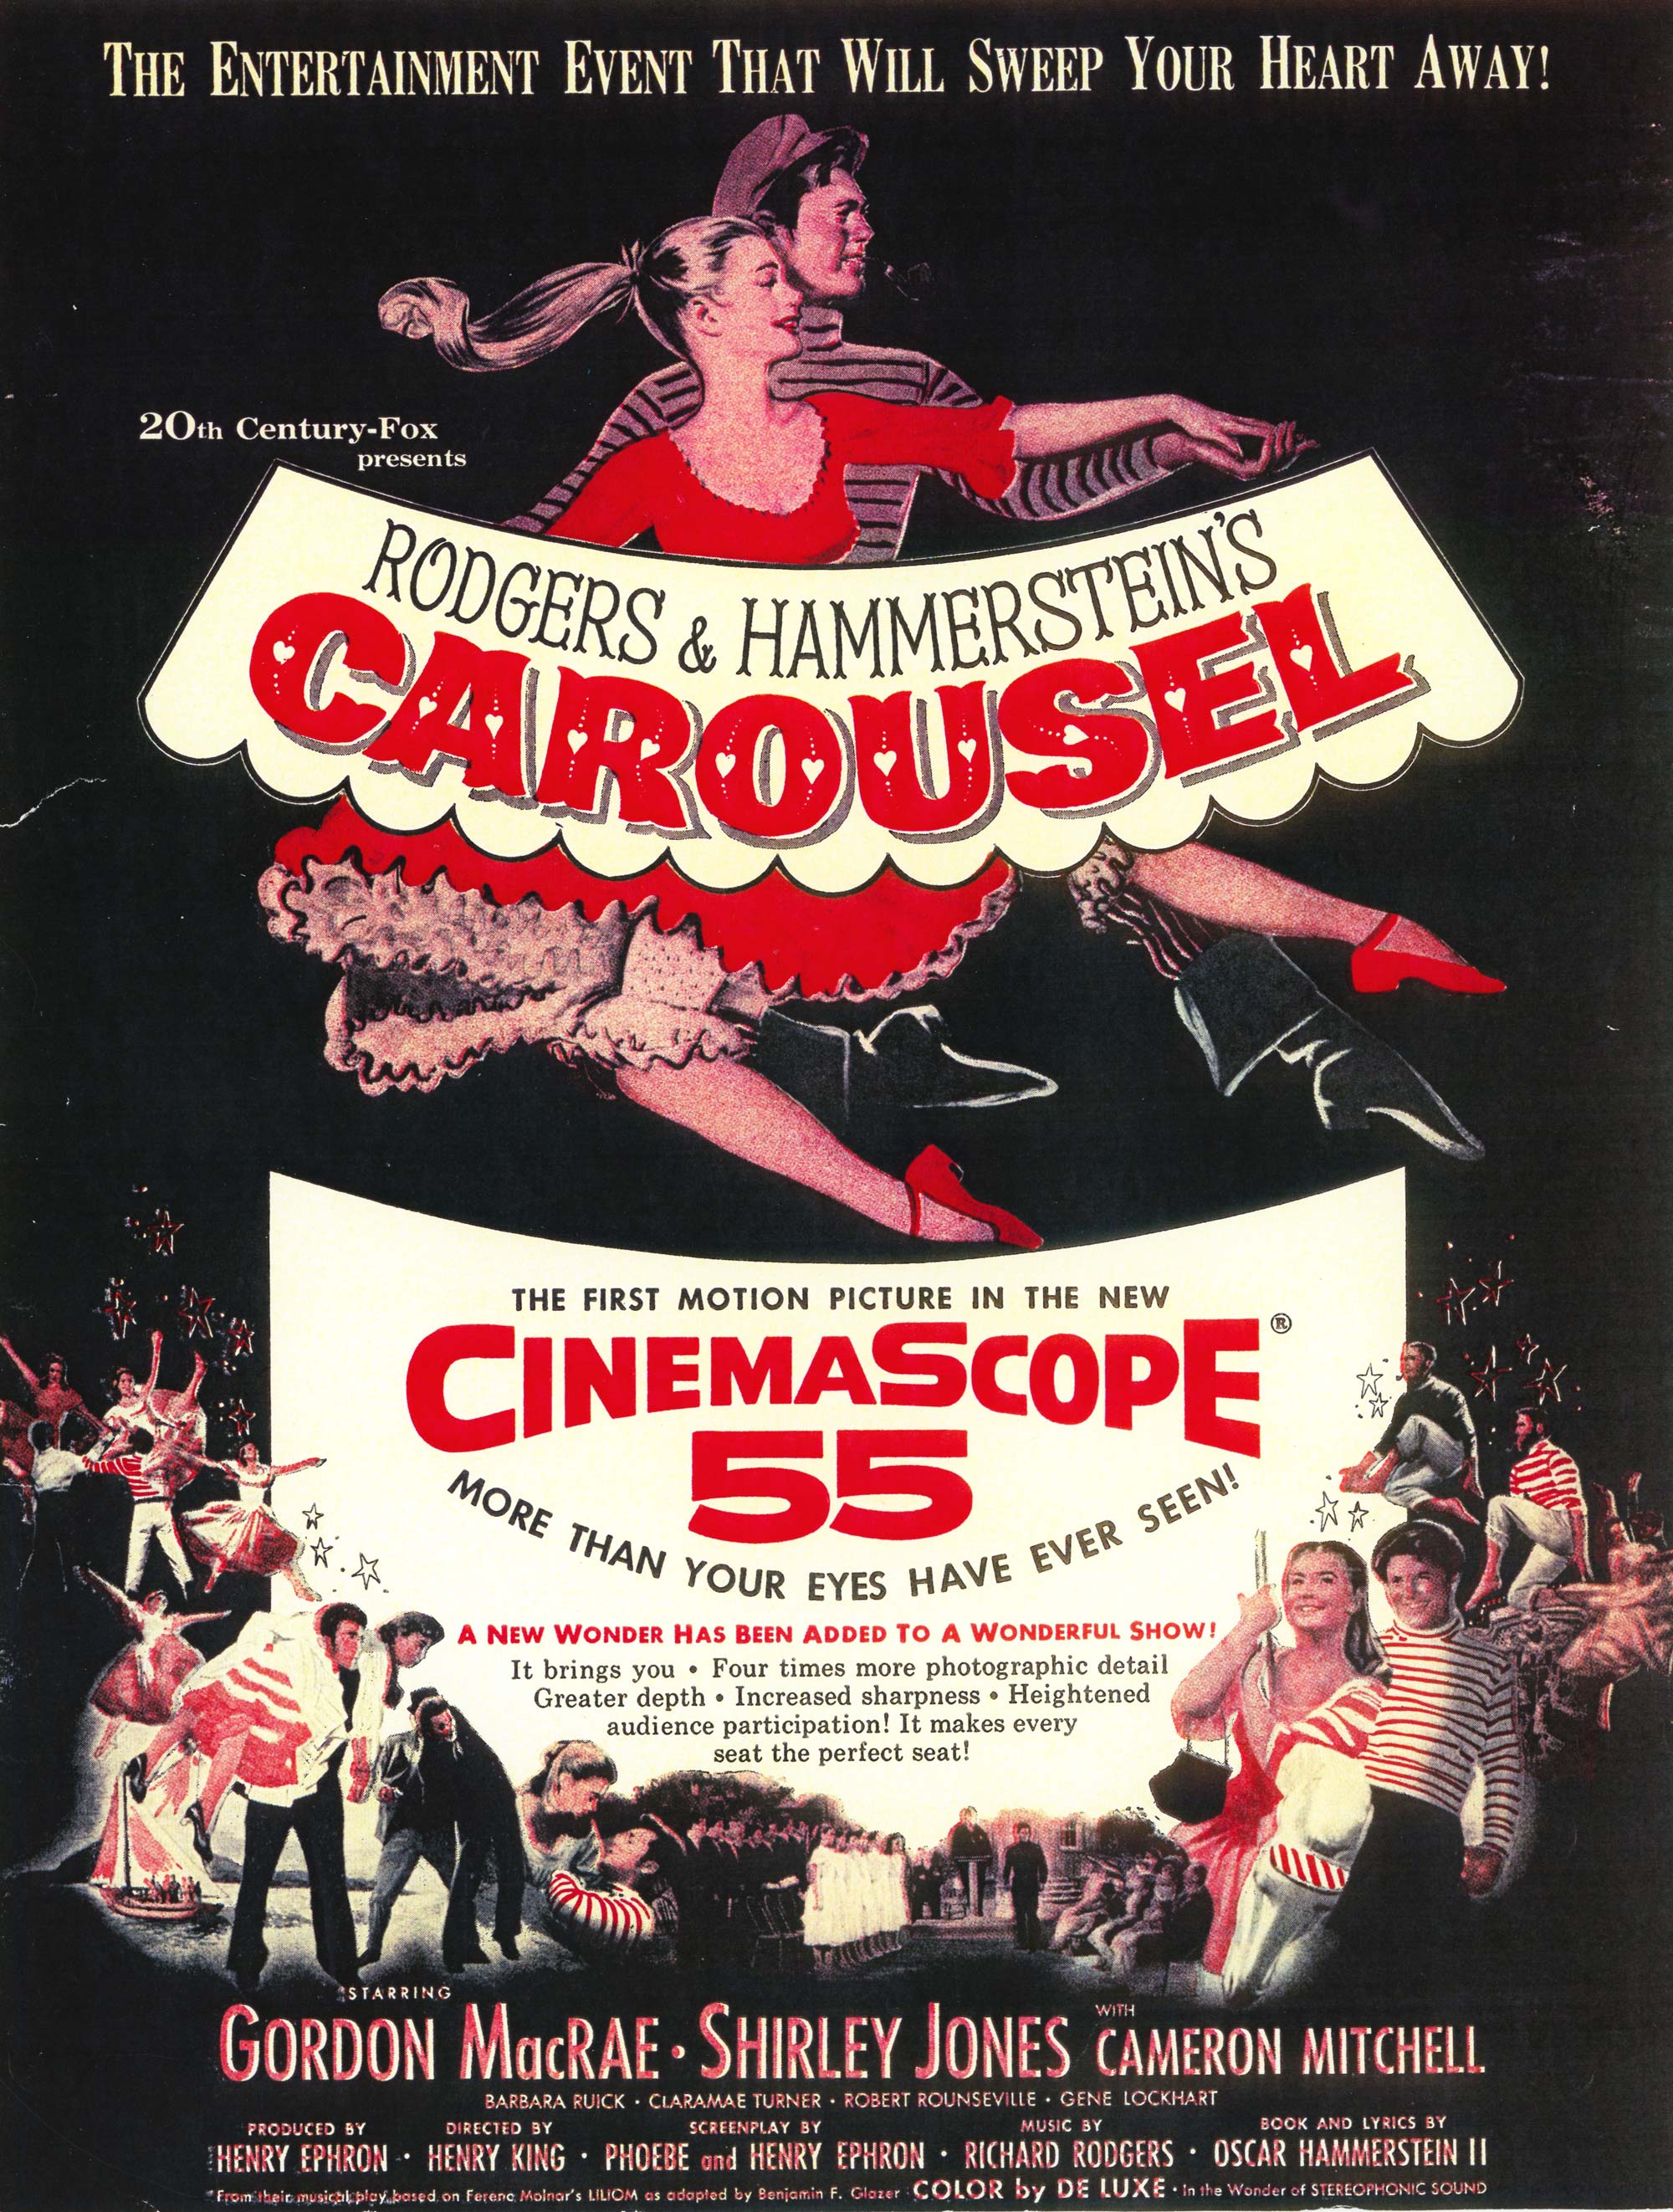 A poster for the 1956 film version of Carousel.